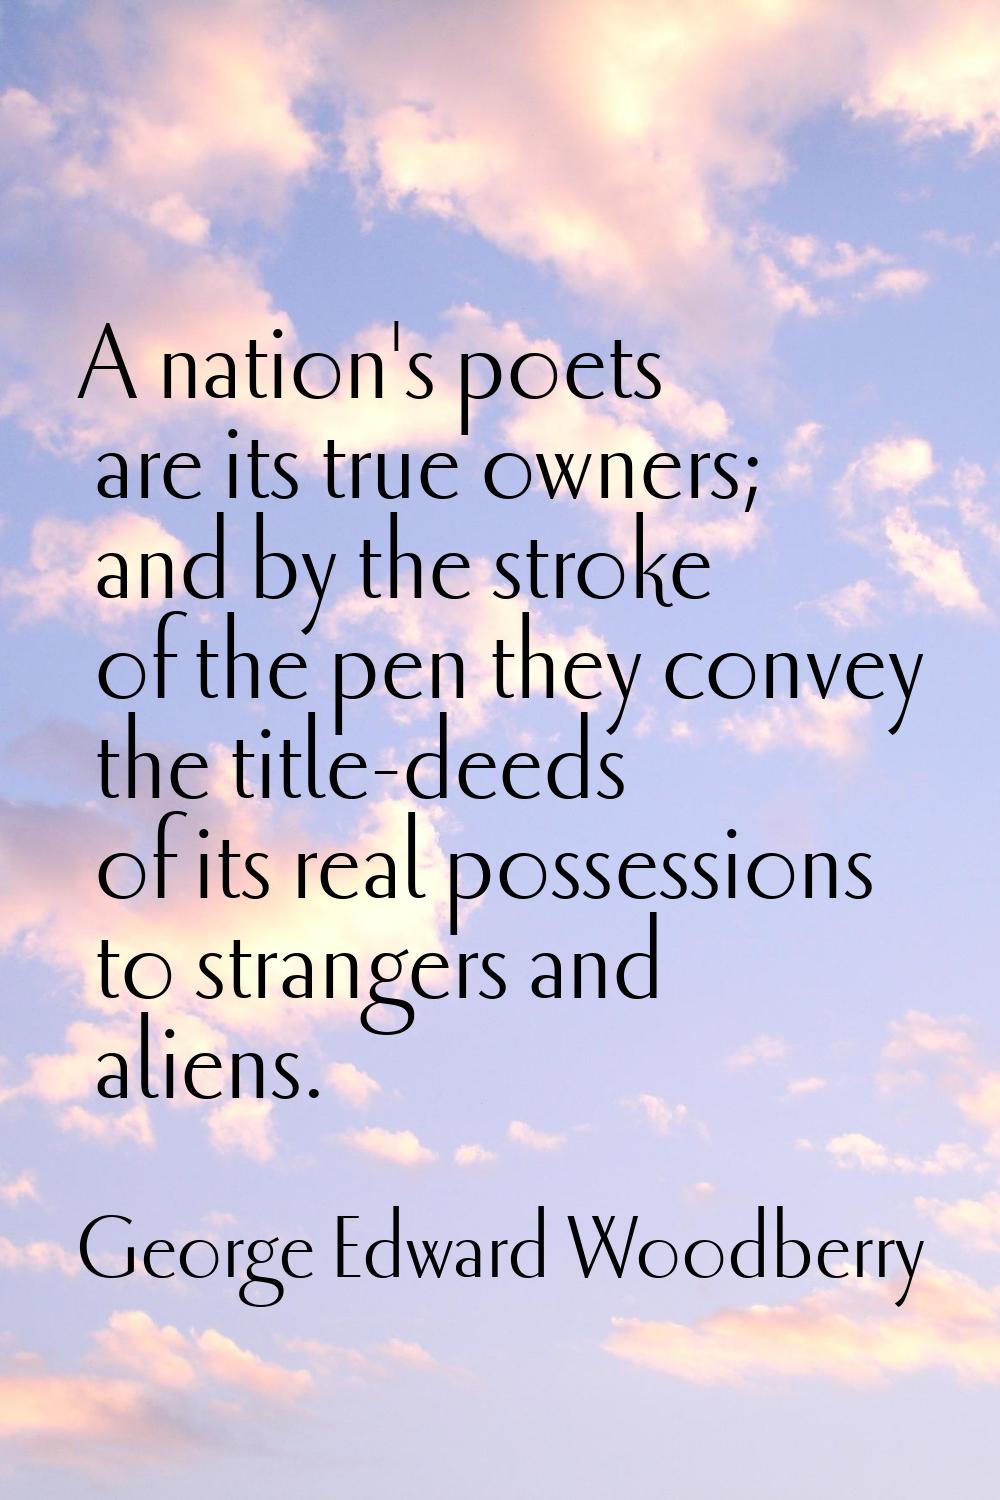 A nation's poets are its true owners; and by the stroke of the pen they convey the title-deeds of i